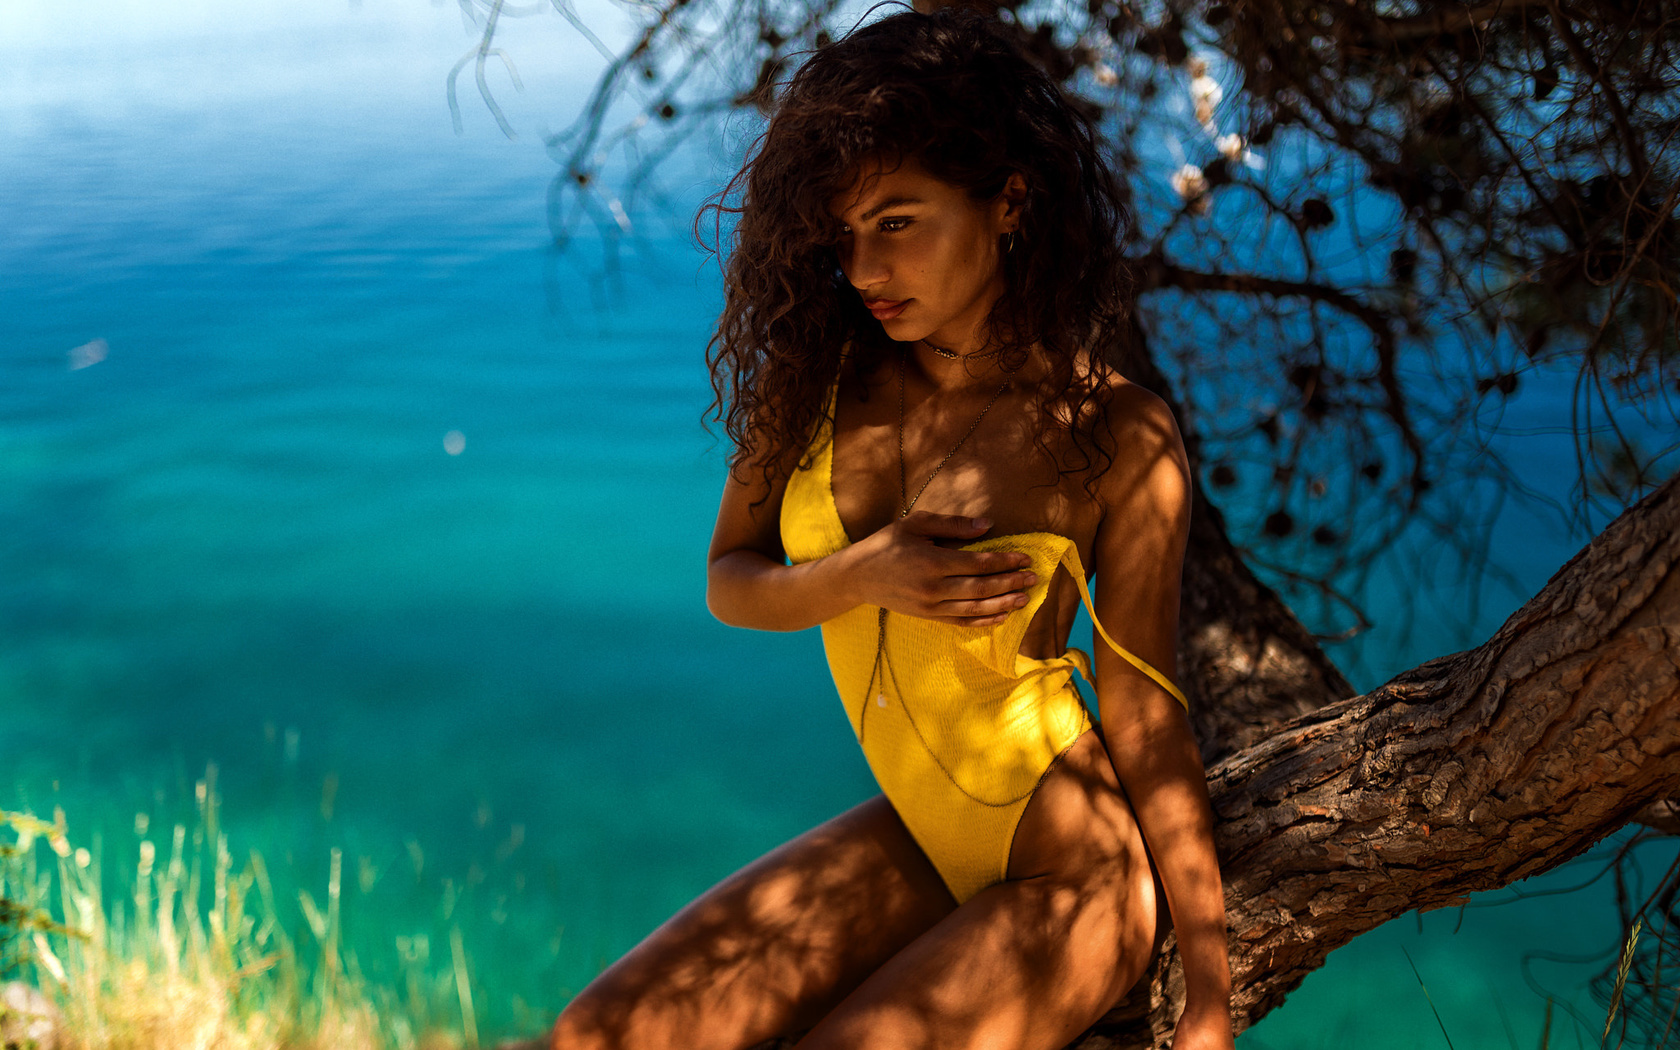 women, miro hofmann, tanned, sitting, hands on boobs, water, curly hair, one-piece swimsuit, trees